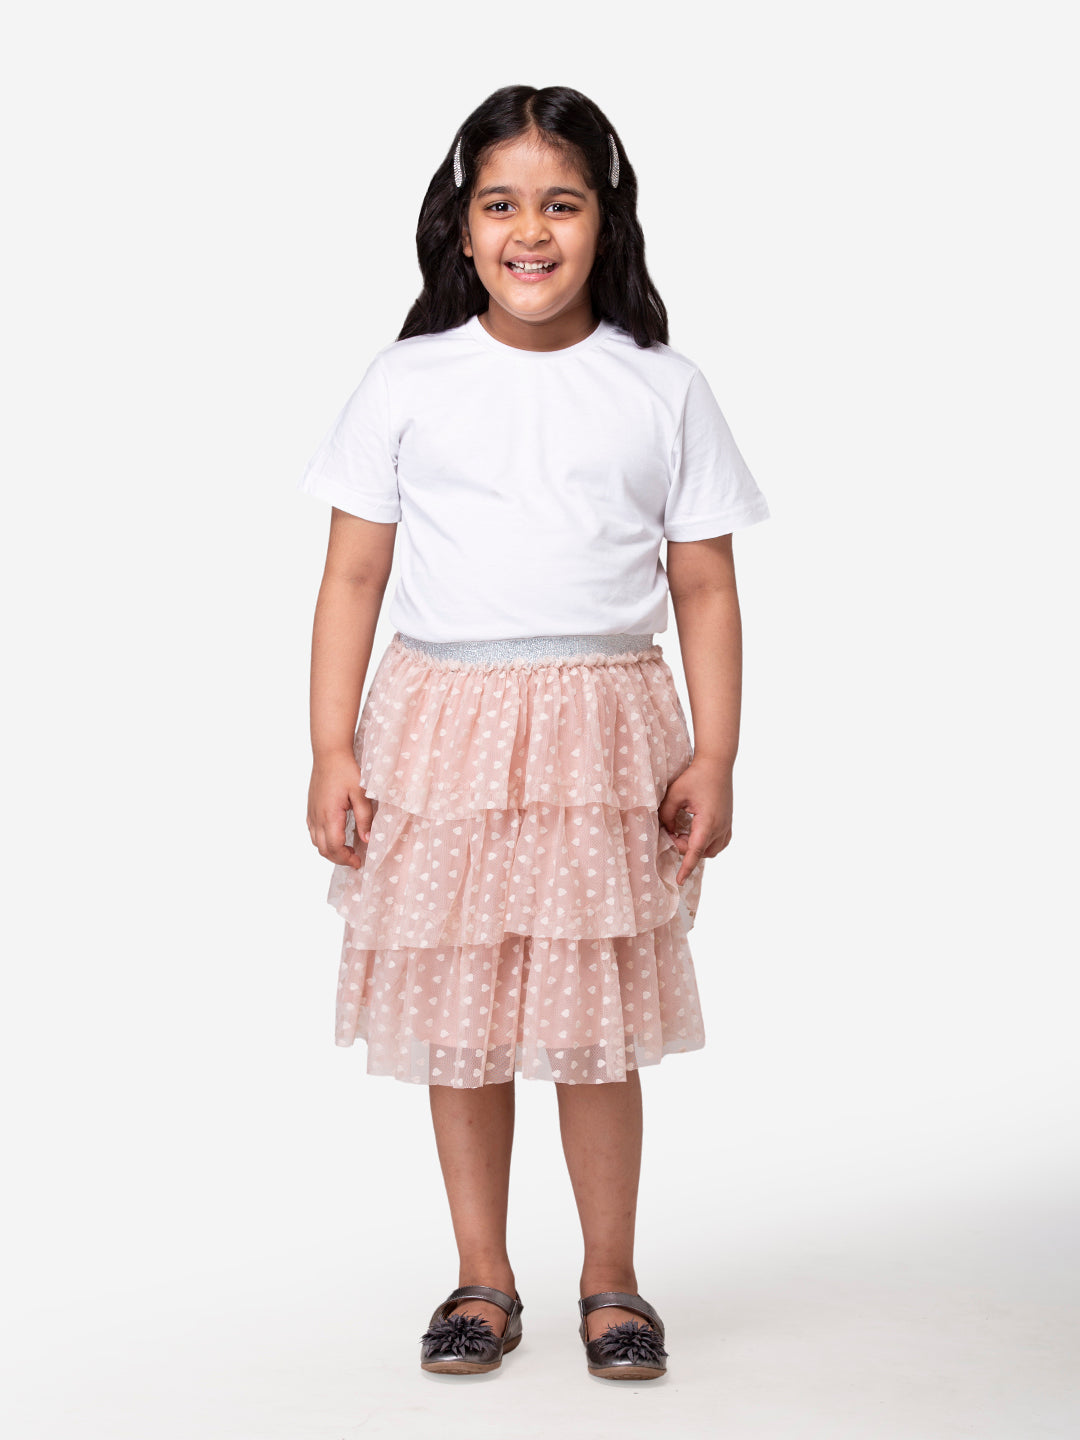 Hoop Hippo Kids Peach Gold Polka Dot Cotton Voile Lace Layered Skirt